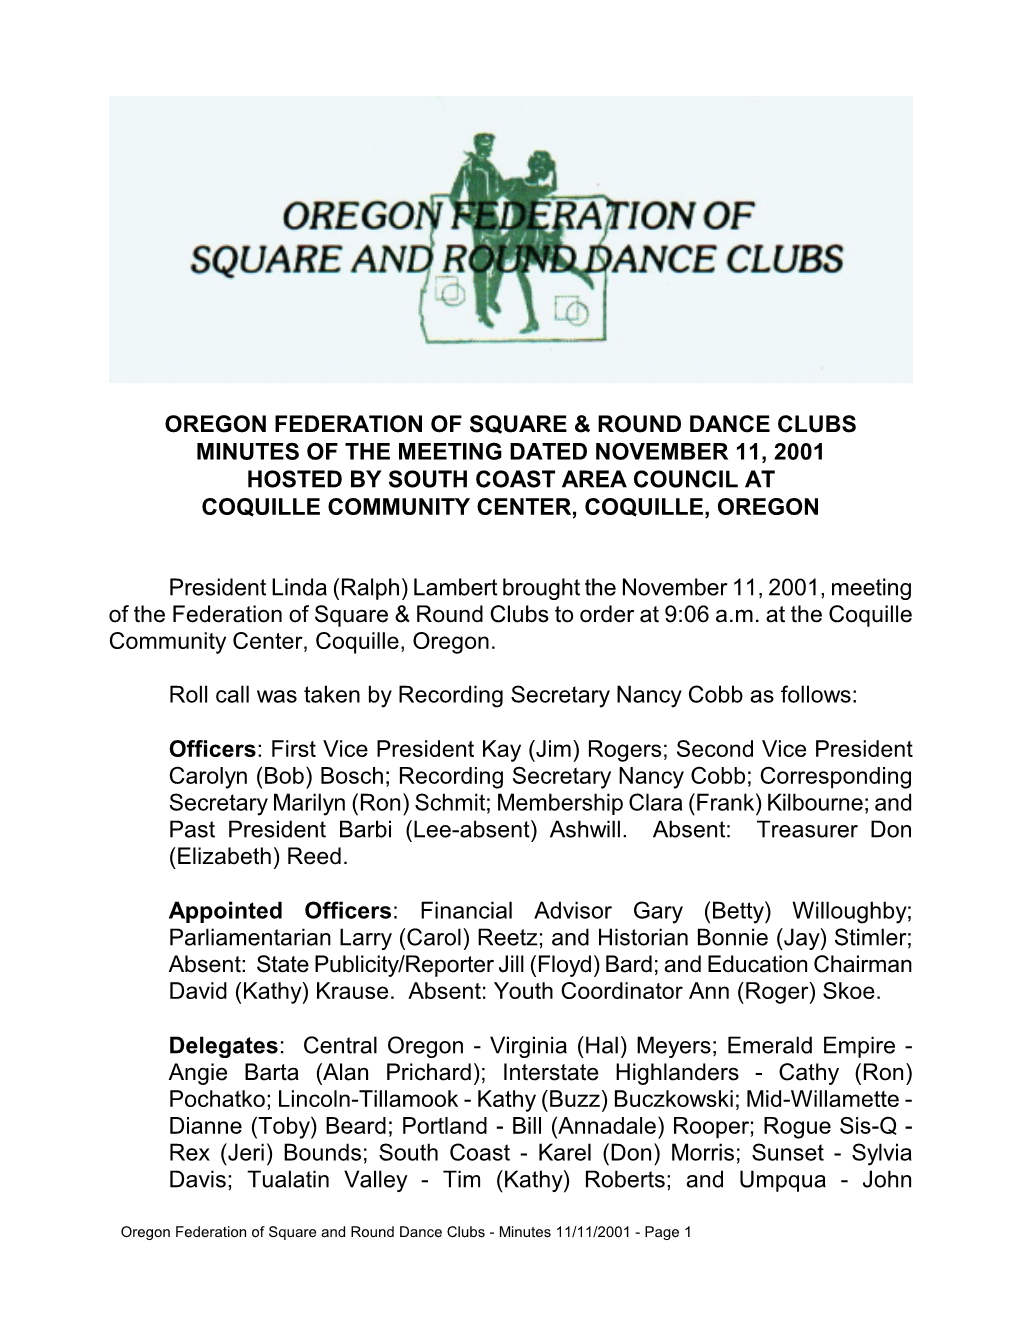 Oregon Federation of Square & Round Dance Clubs